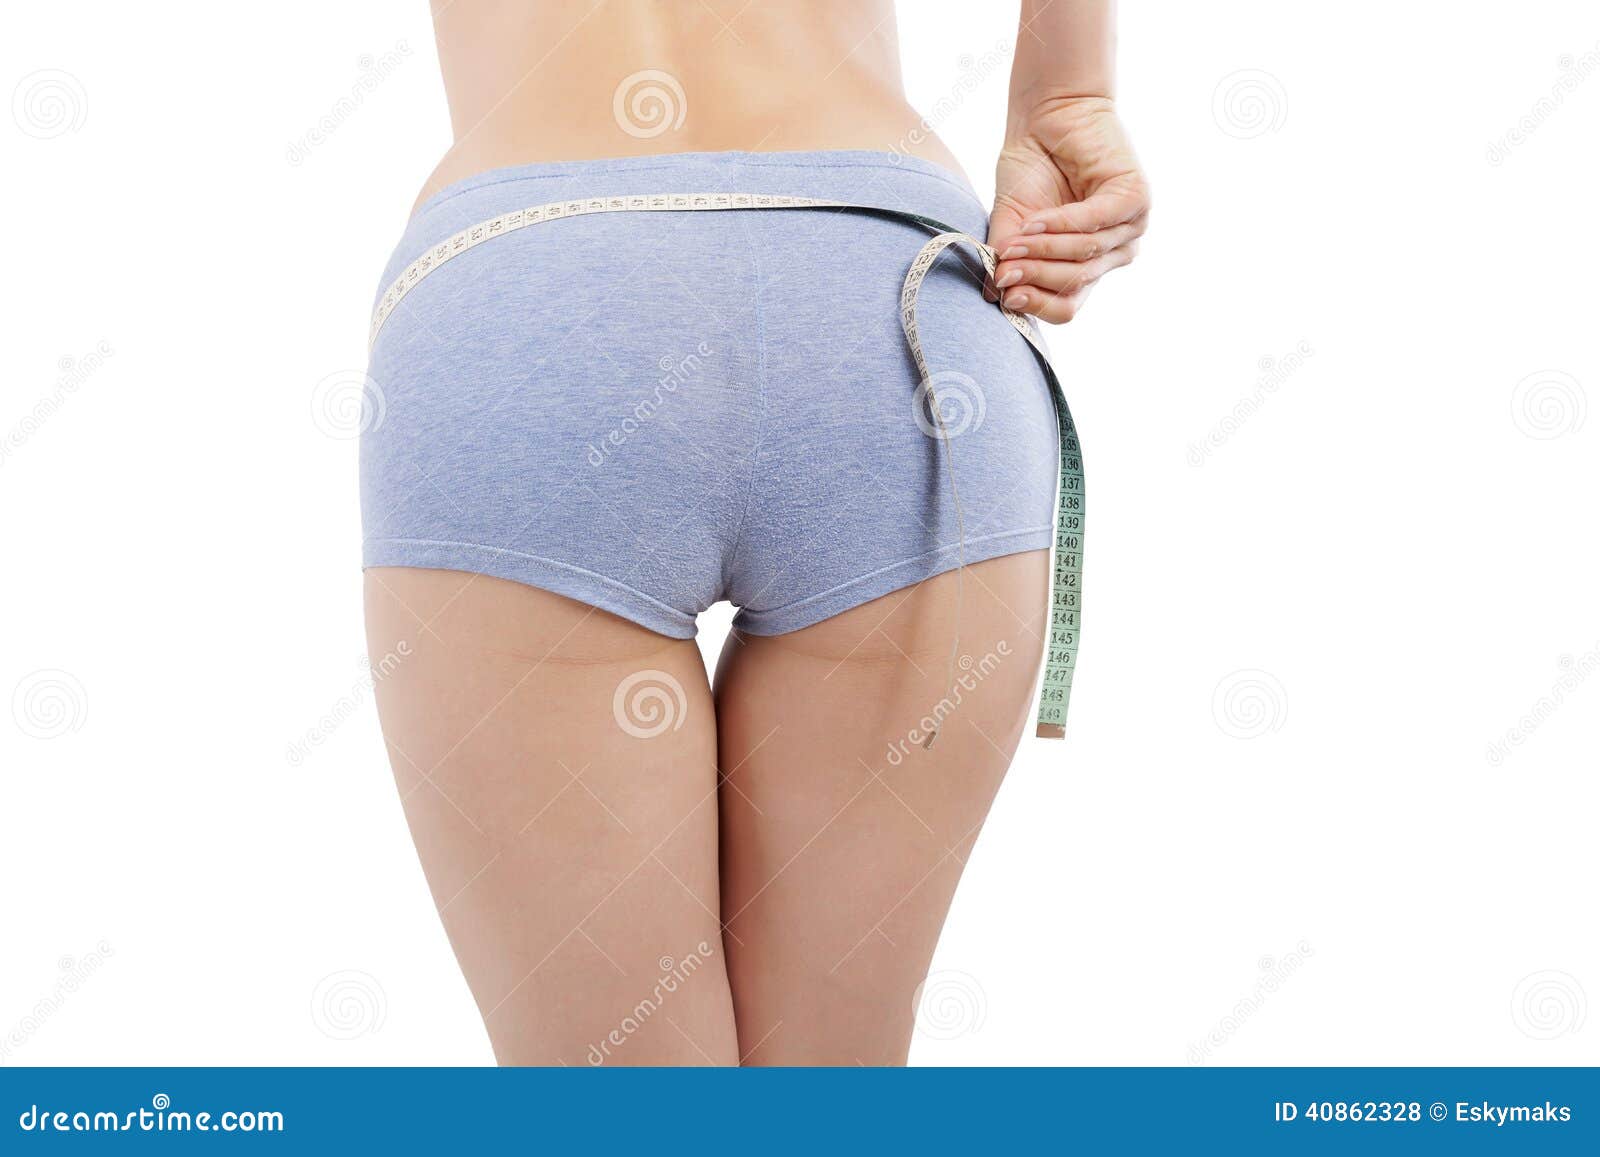 Rear View Of The Midriff And Buttocks Of A 38 Year Old Woman In Underwear  Posing In A Bathroom In A Concept Of Weight And Healthy Diet Stock Photo,  Picture and Royalty